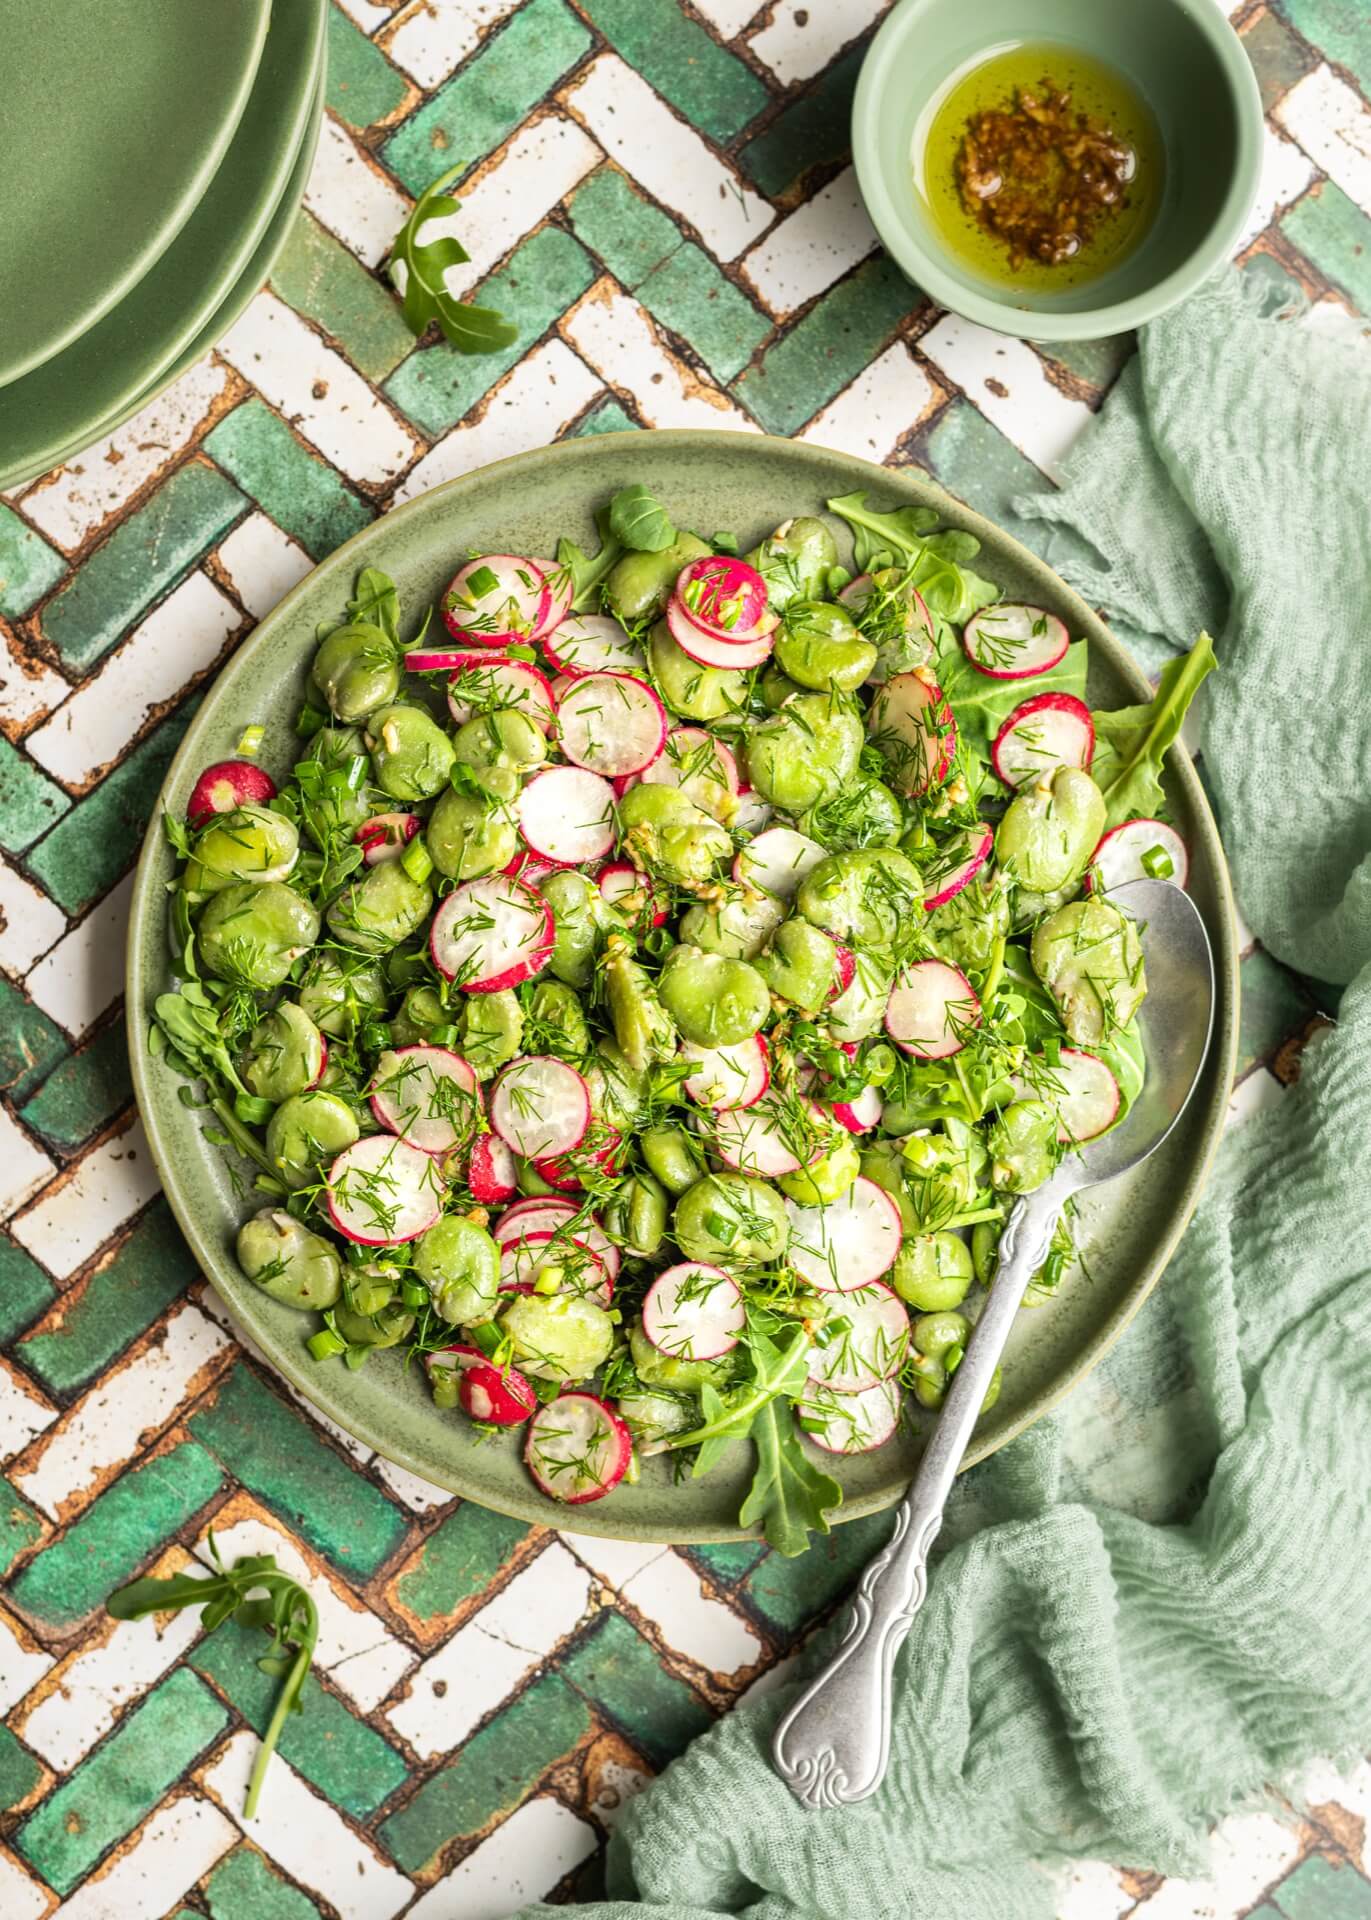 PEA AND BEAN SALAD WITH RADISHES AND DILL